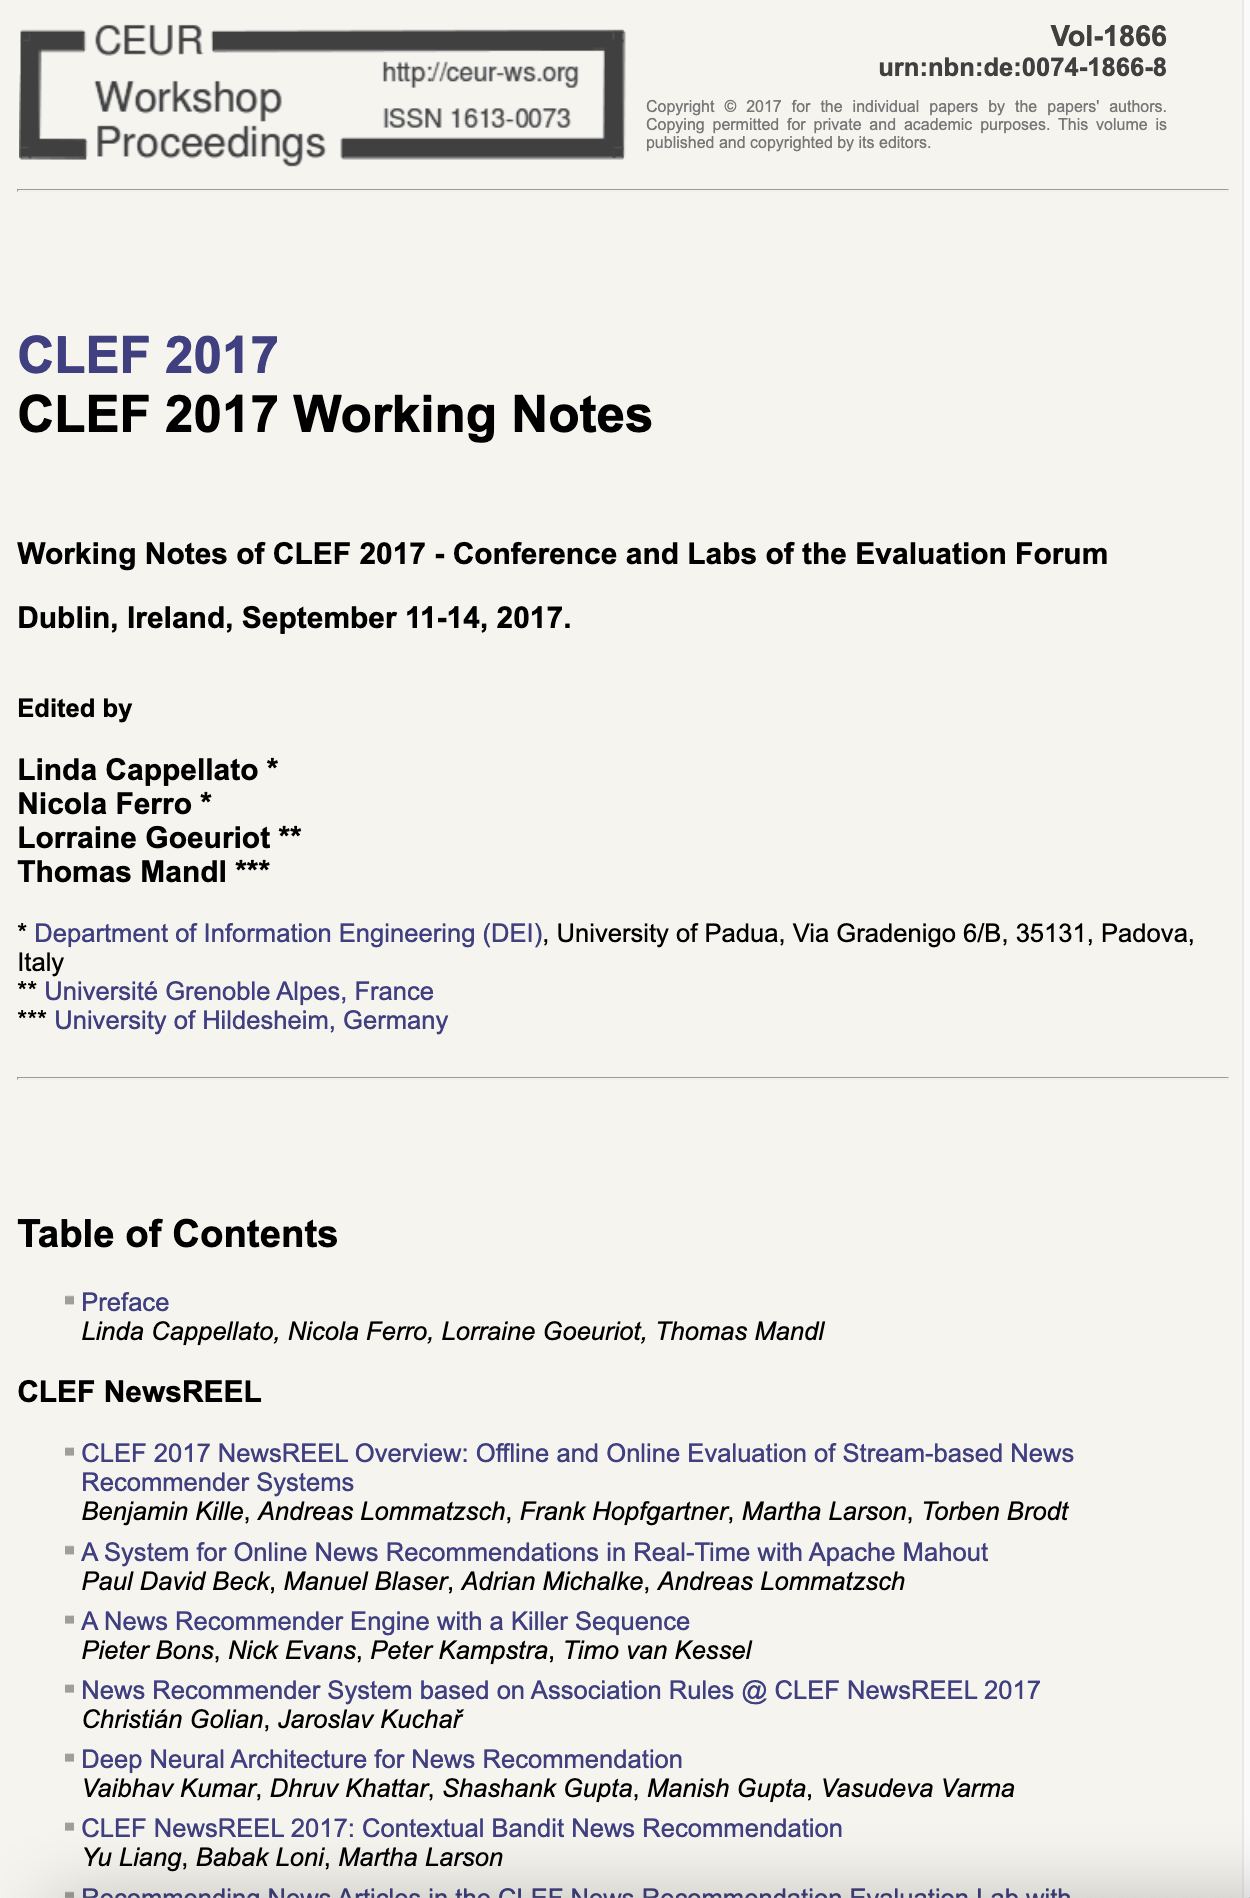 CLEF 2017 CEUR-WS Working Notes page